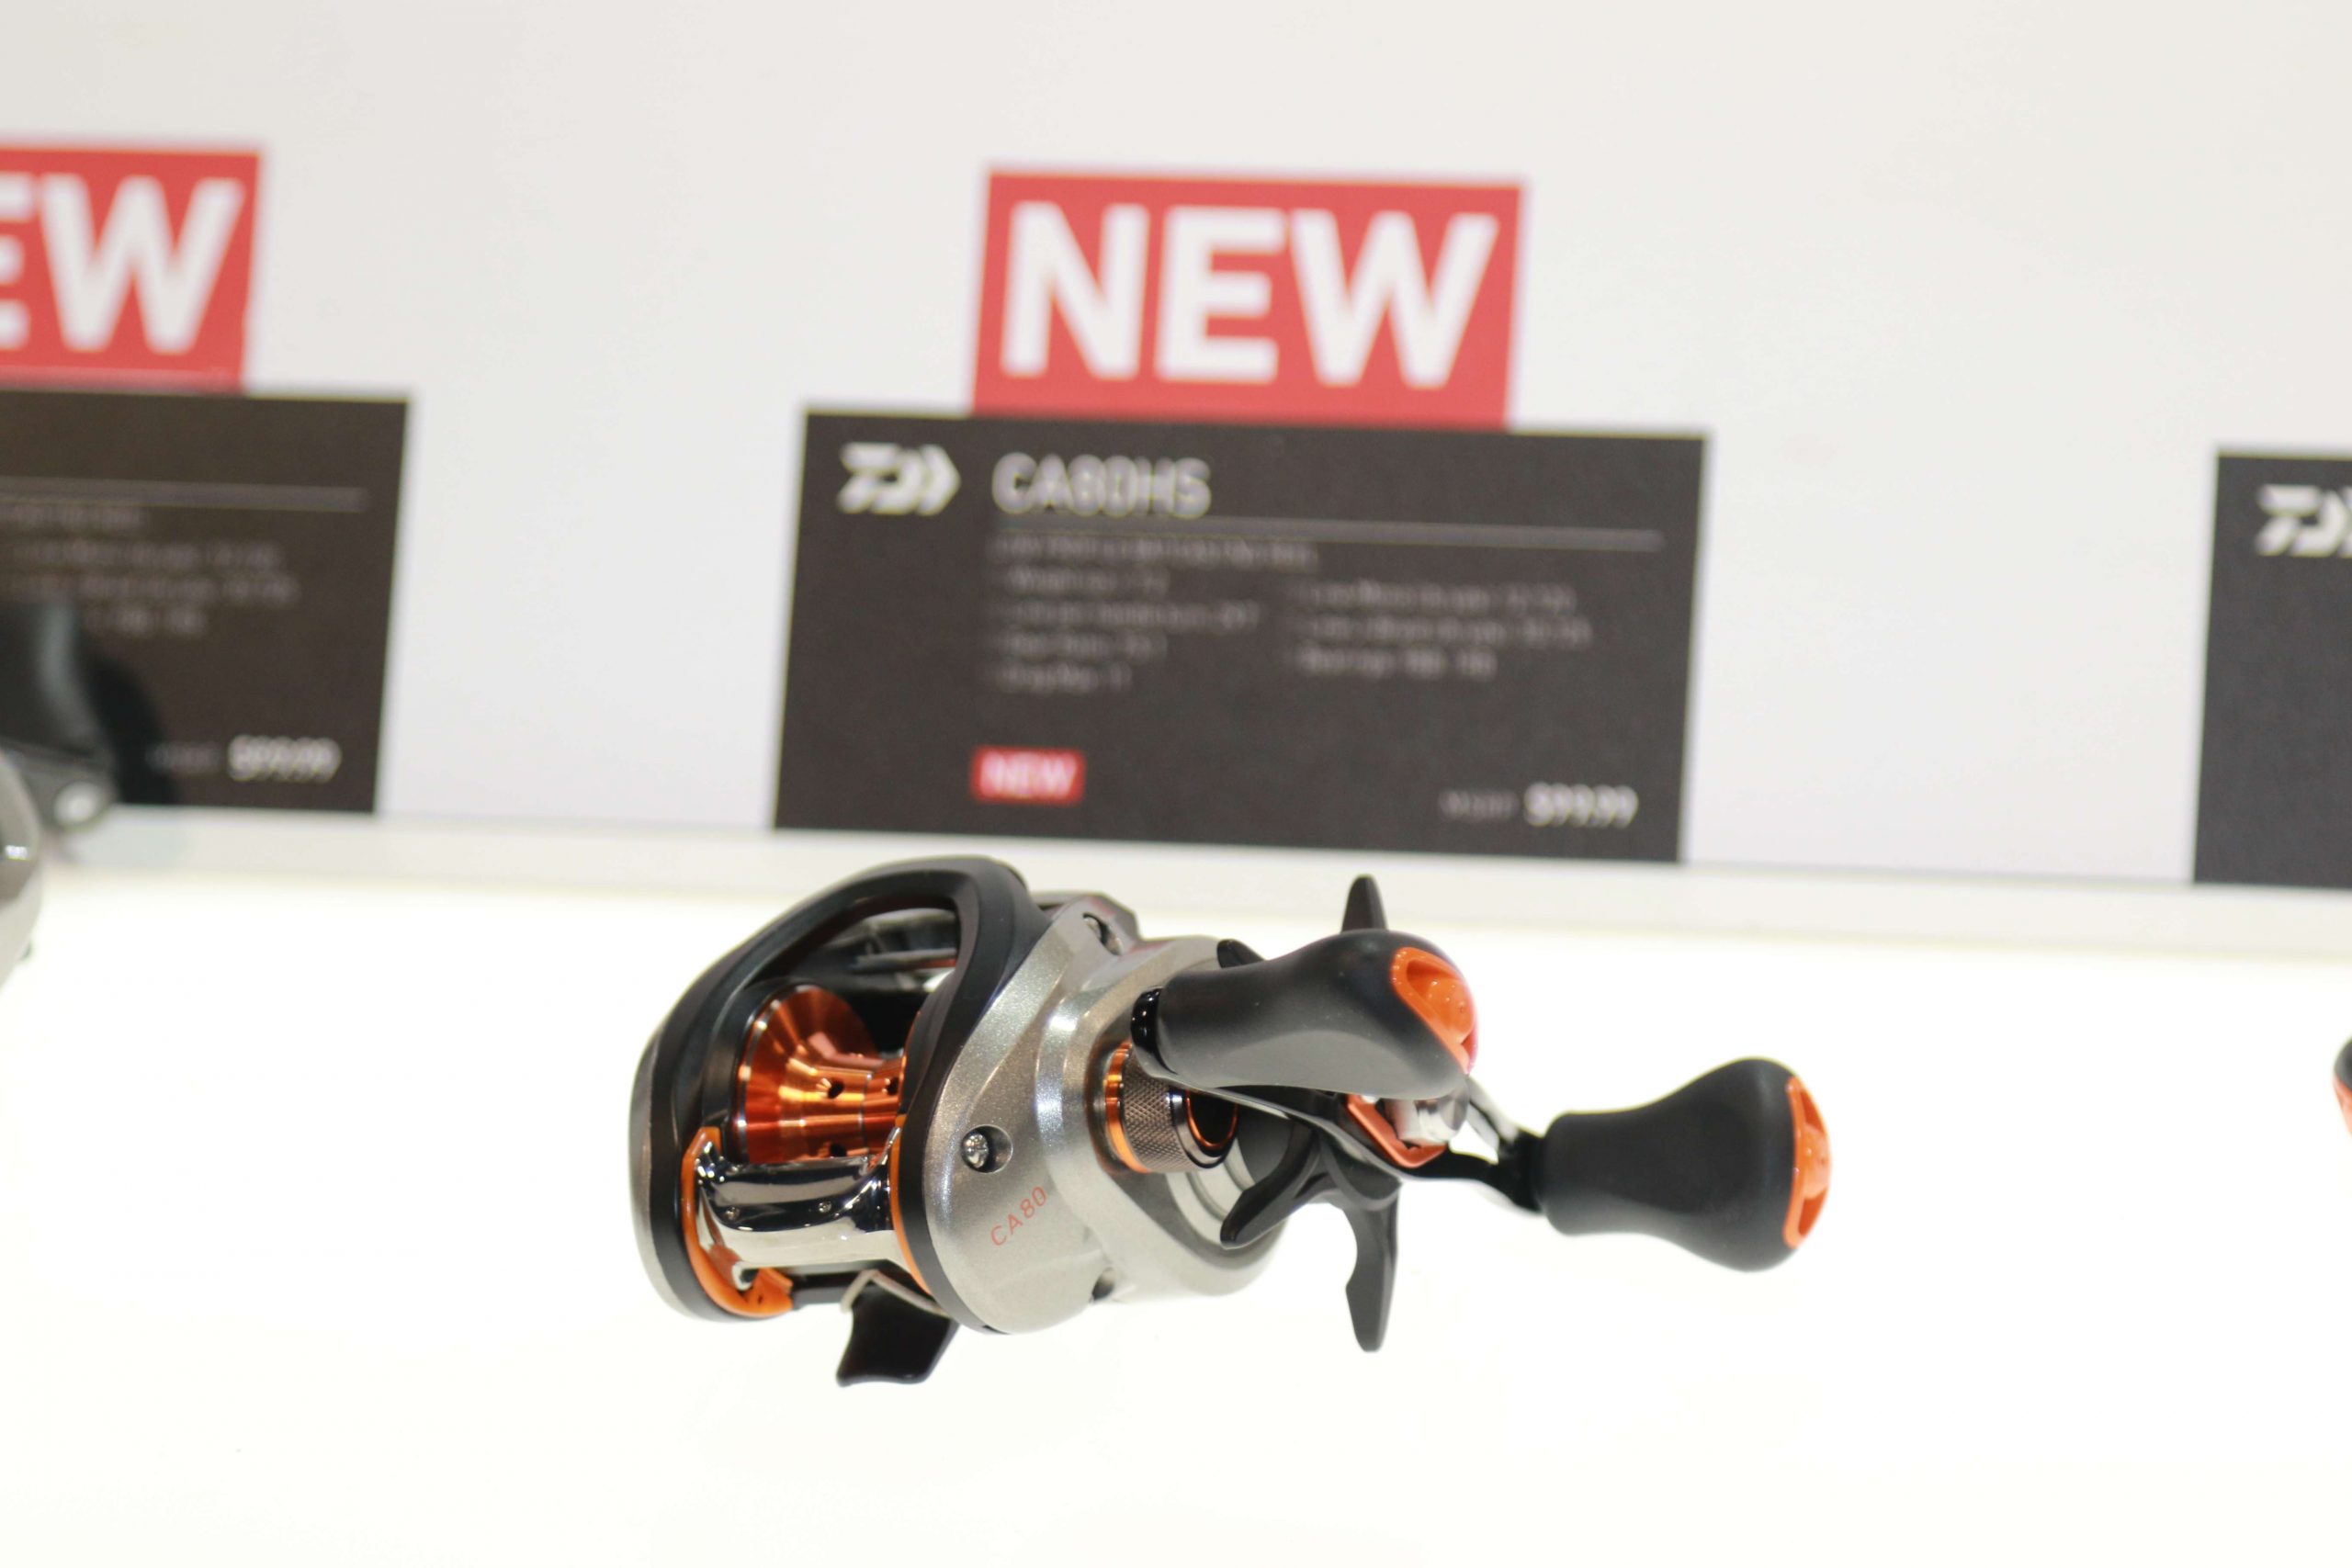 The new CA80 by Daiwa packs a lot of quality and functionality into a $99.99 reel.